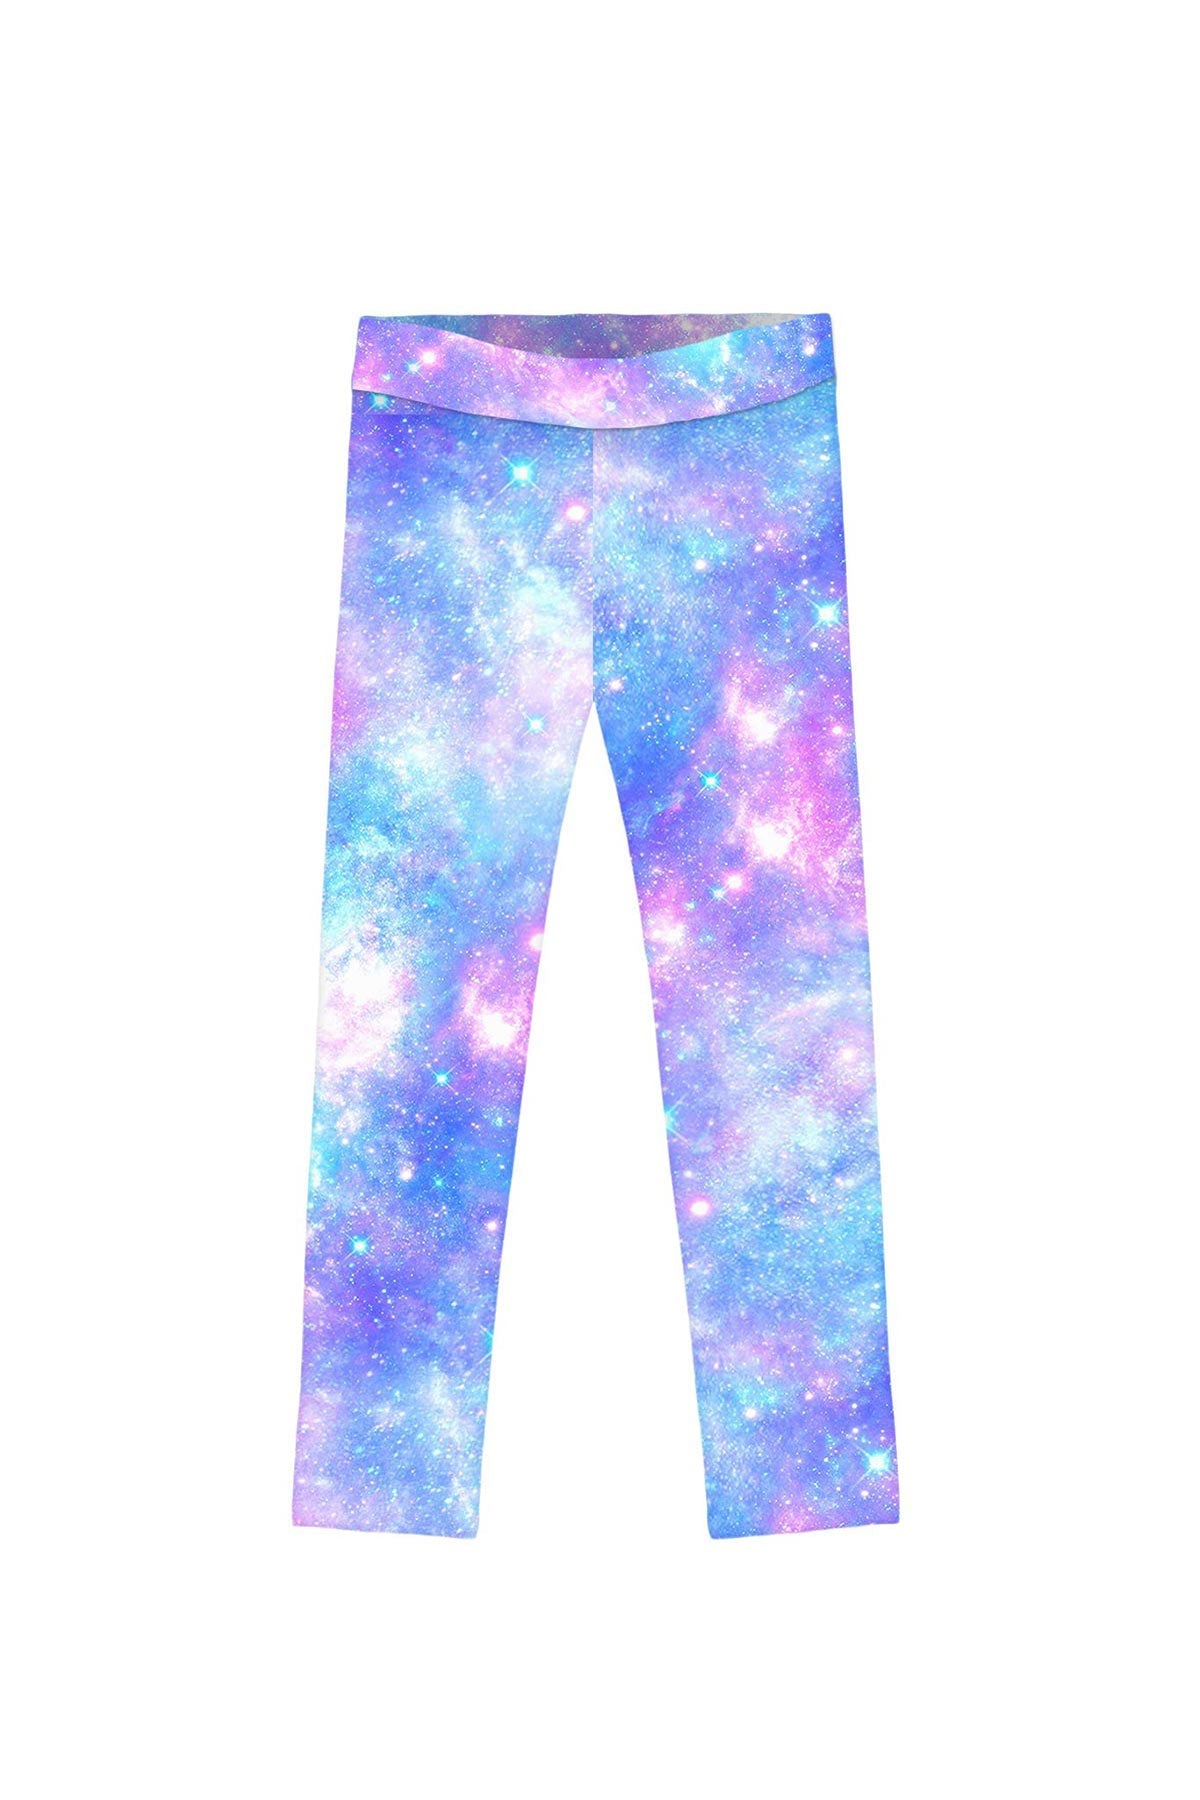 3 for $49! Wizard Lucy Blue Cute Colorful Galaxy Printed Stretch Leggings - Kids - Pineapple Clothing